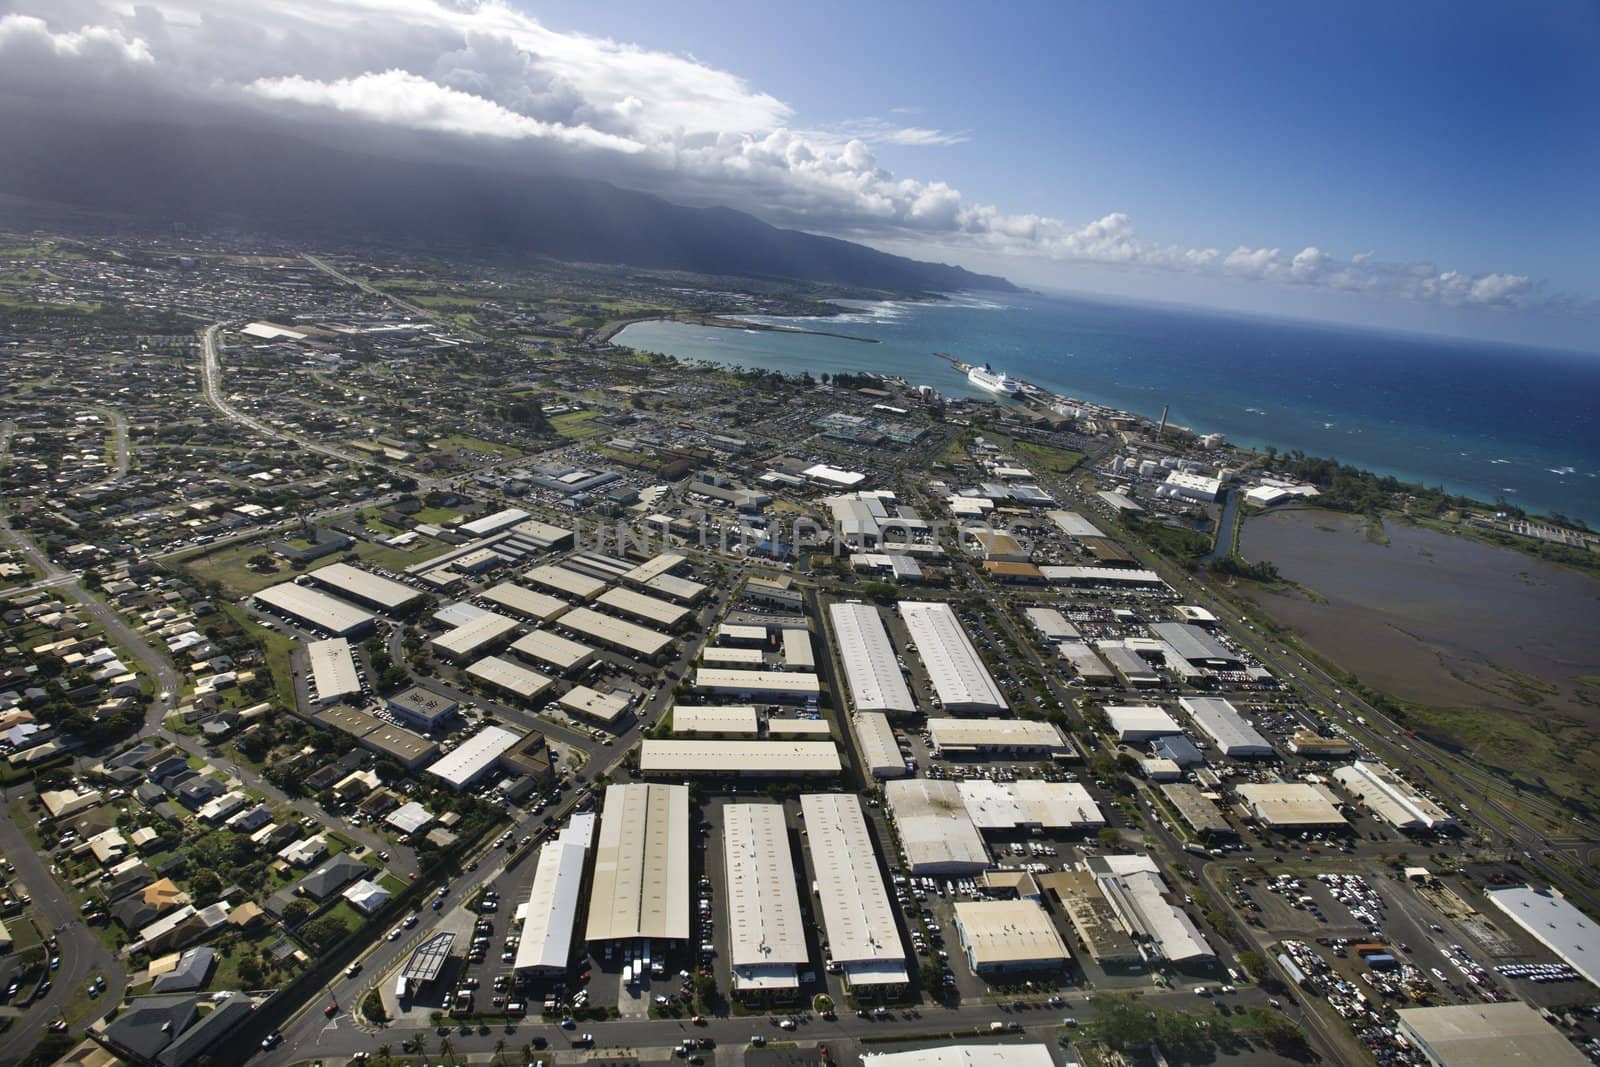 Aerial of Maui coastline with buildings and roads.